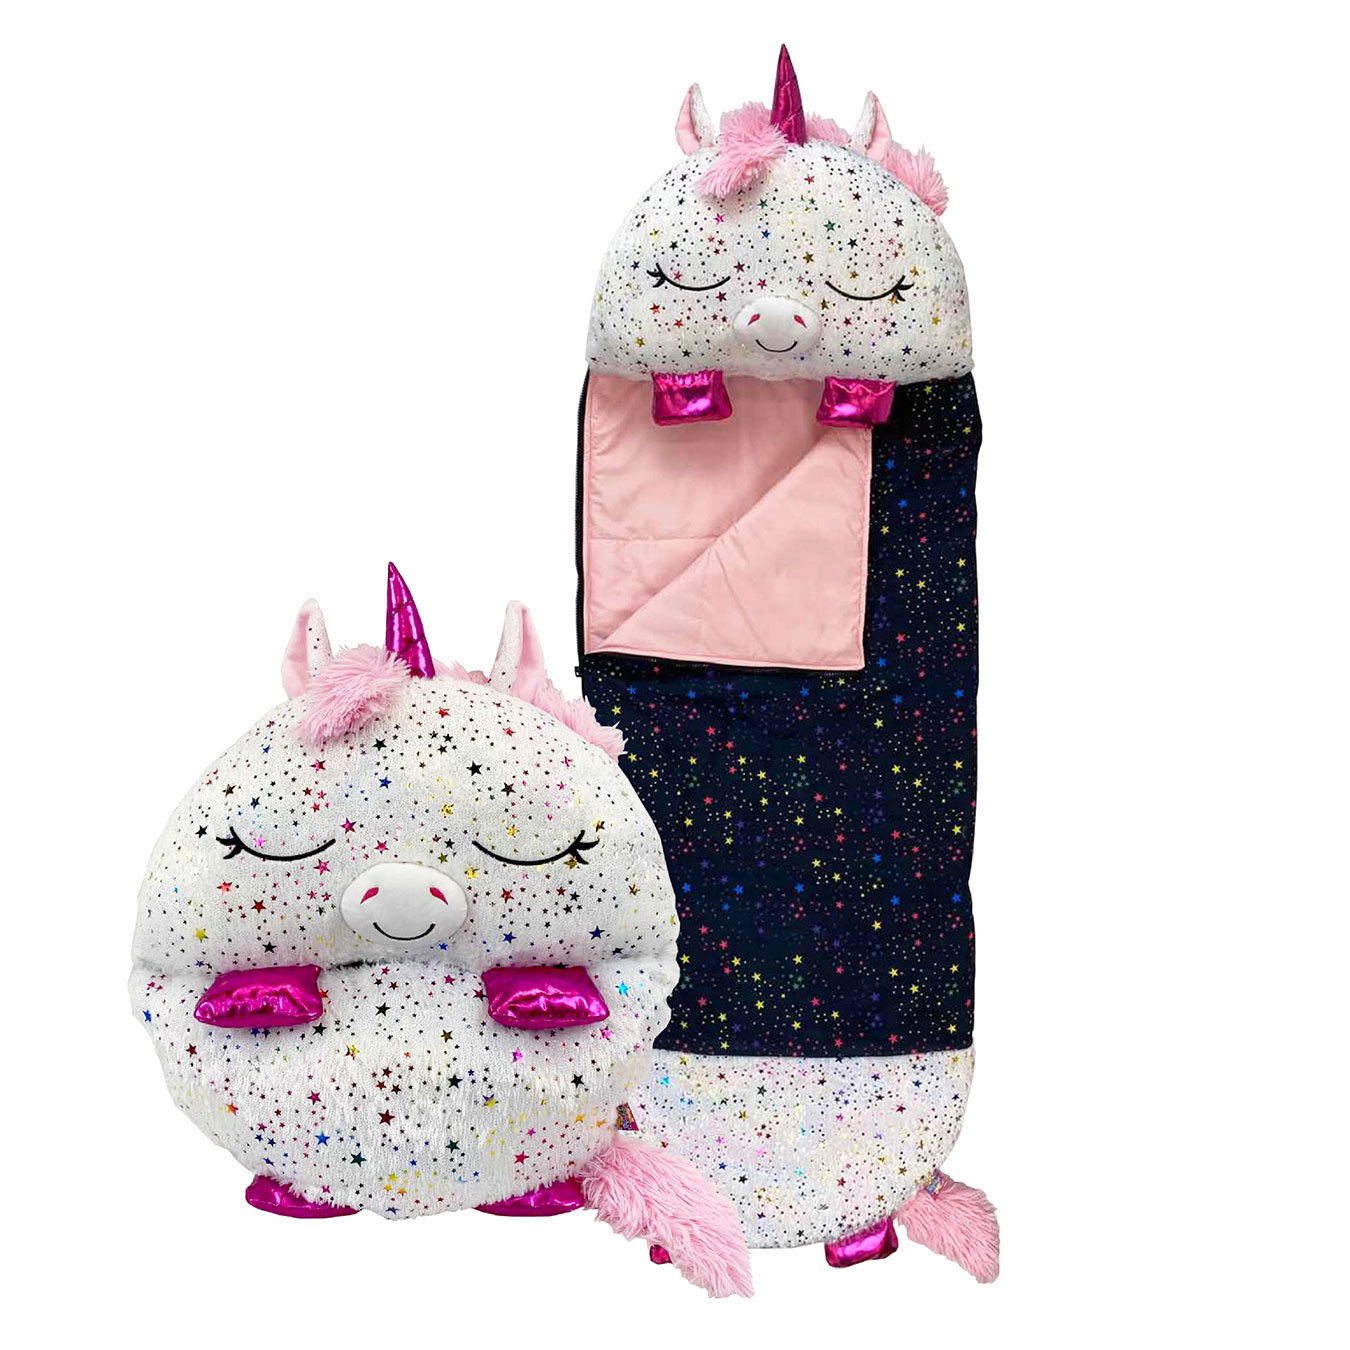 View Happy Nappers Shimmer Unicorn Medium ages 3 to 6 information